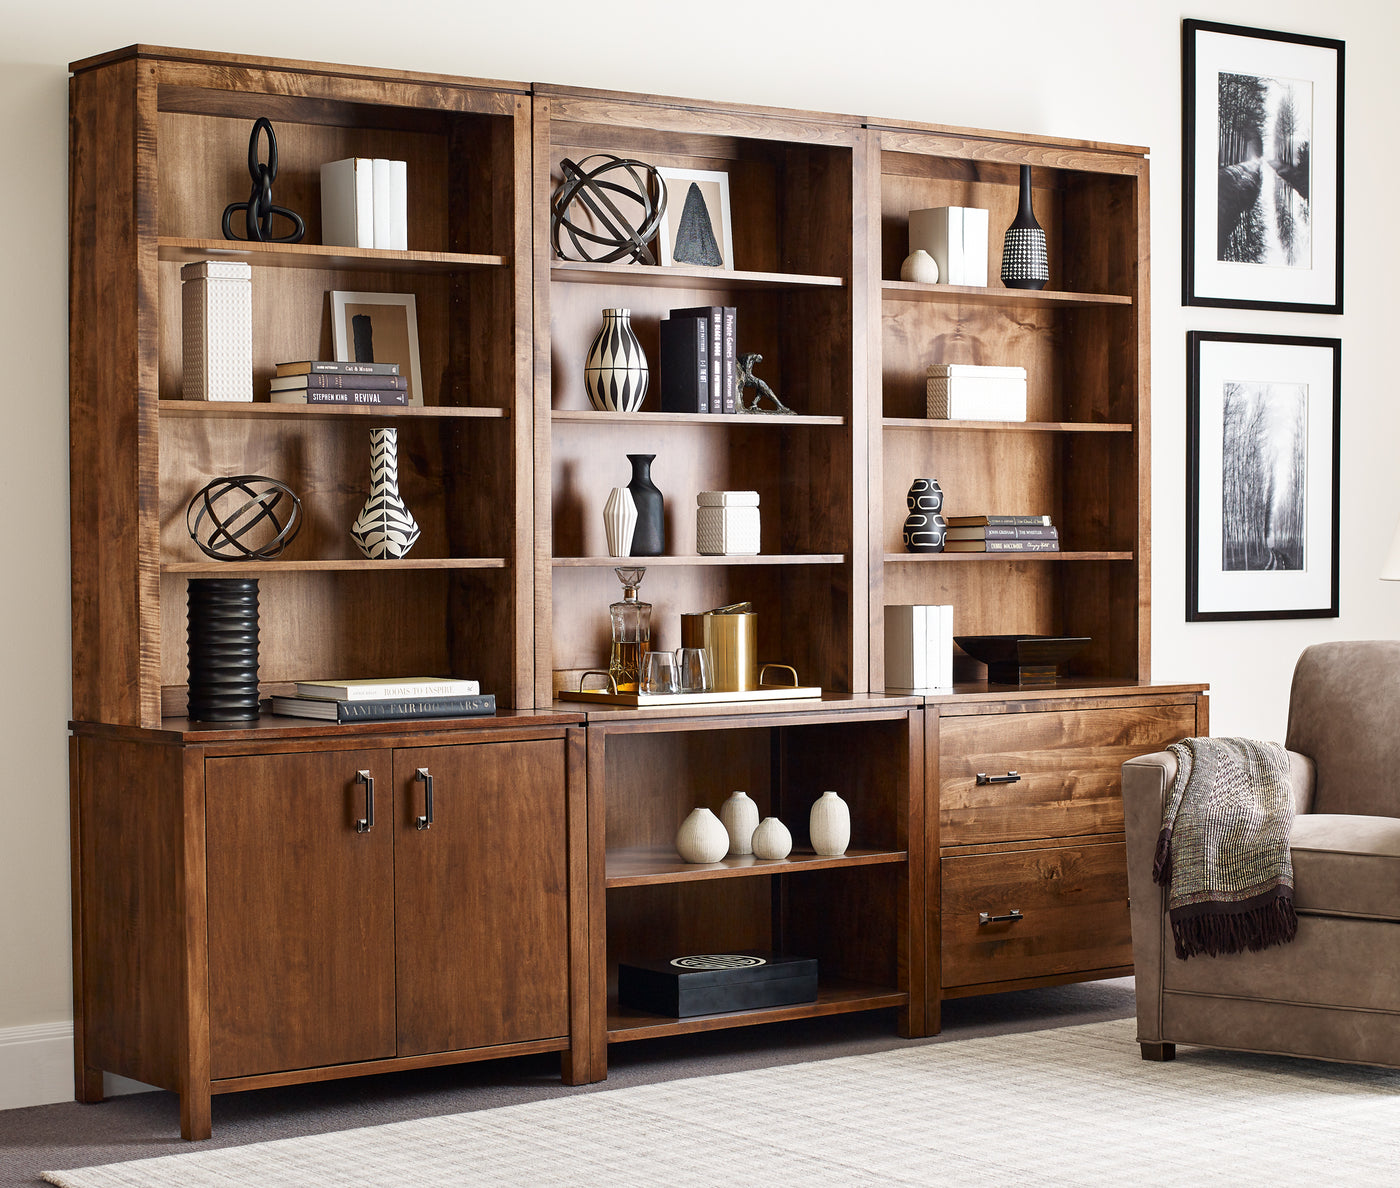 Three Dwyer Hutches, each on top of a Two-Drawer File, Two-Door Cabinet, and an Open Bookcase